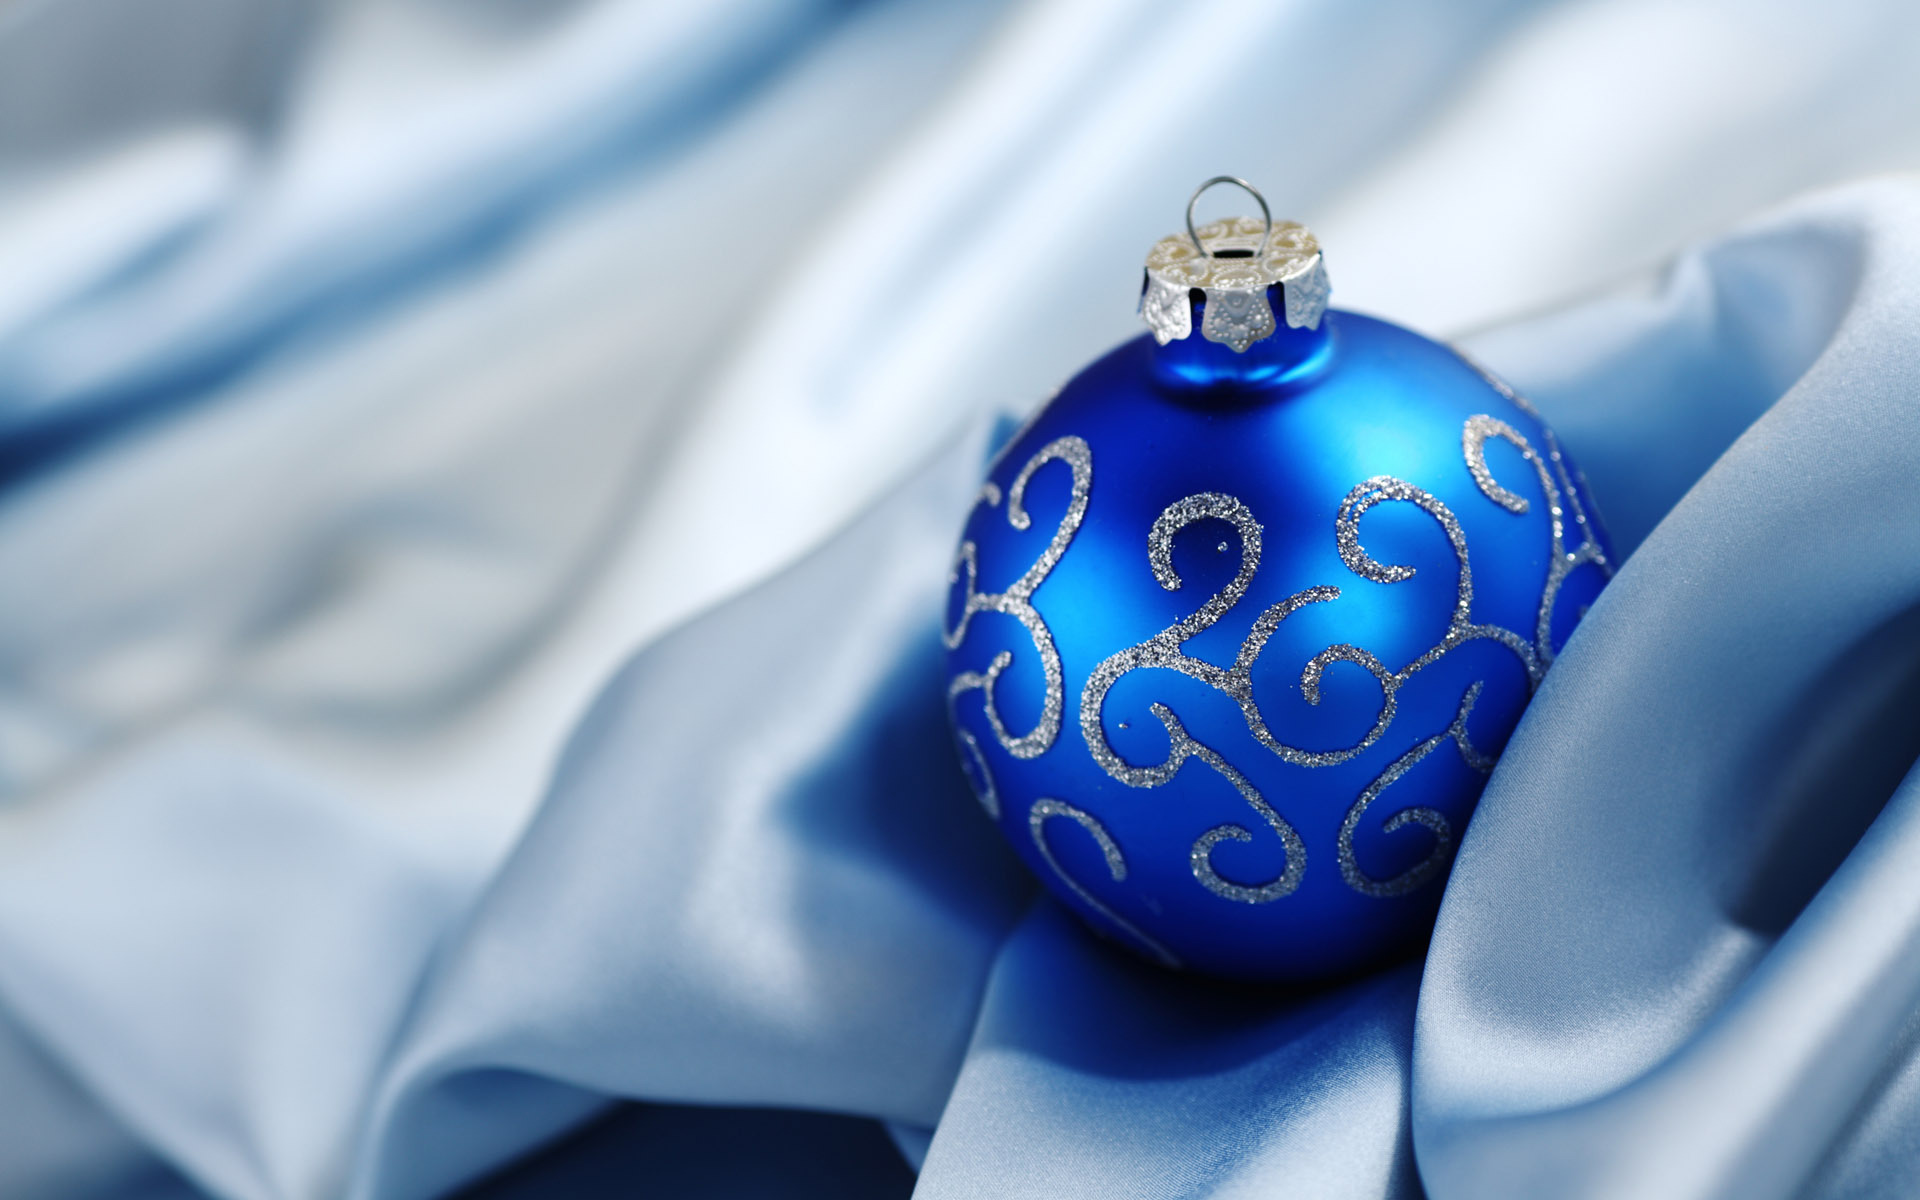 Christmas images Blue Christmas ornaments HD wallpaper and